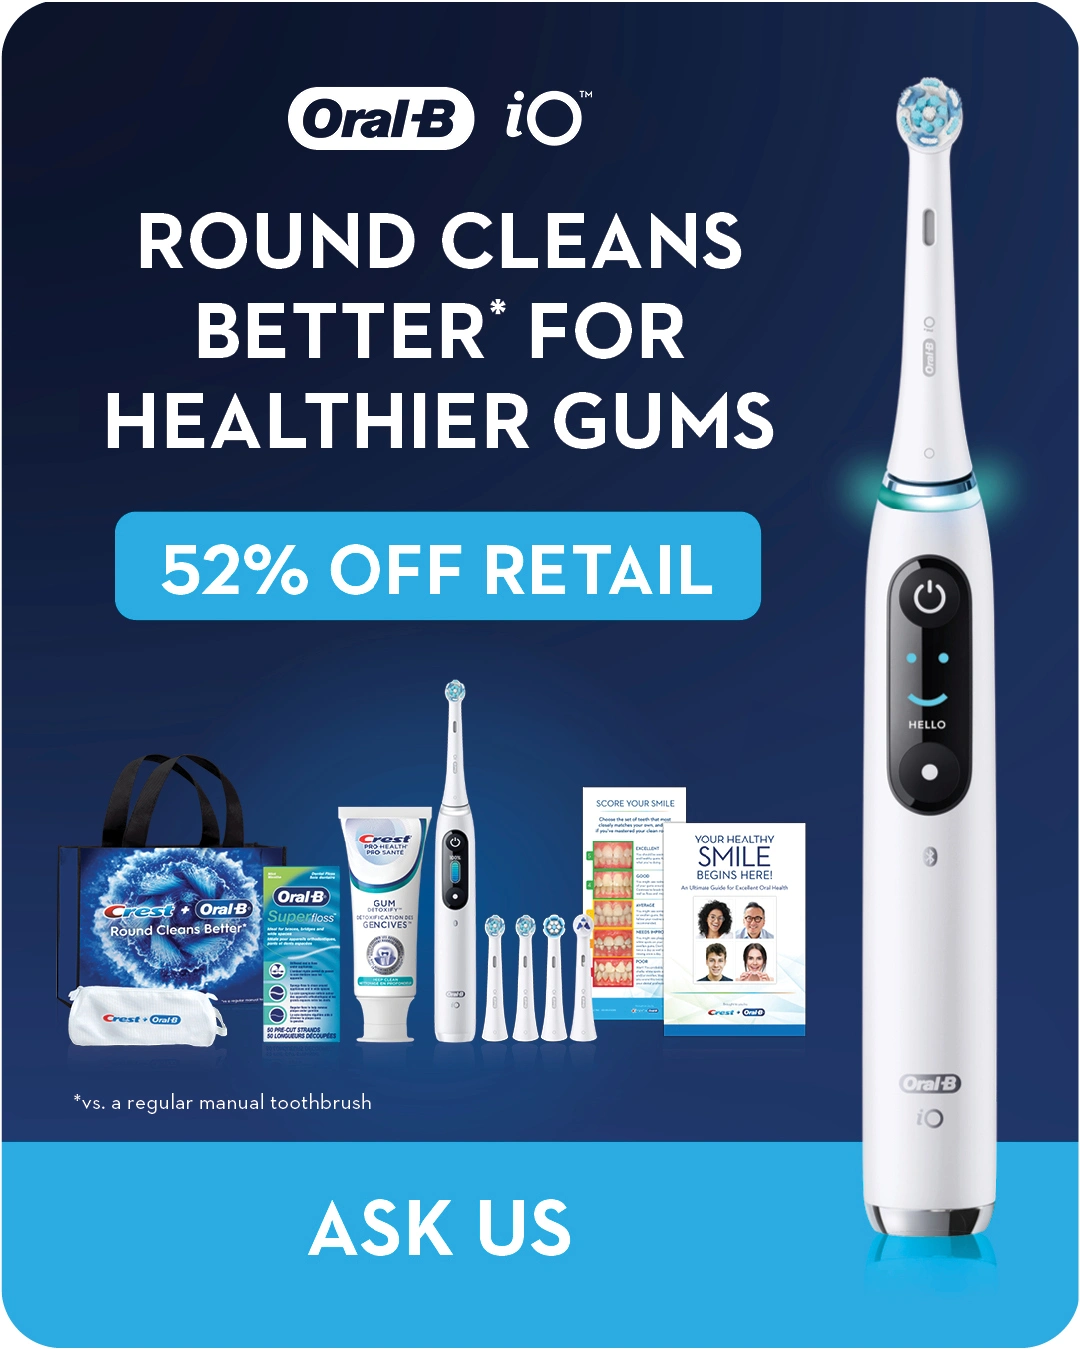 CCH - Instagram Images - Oral-B iO - Thumbnail